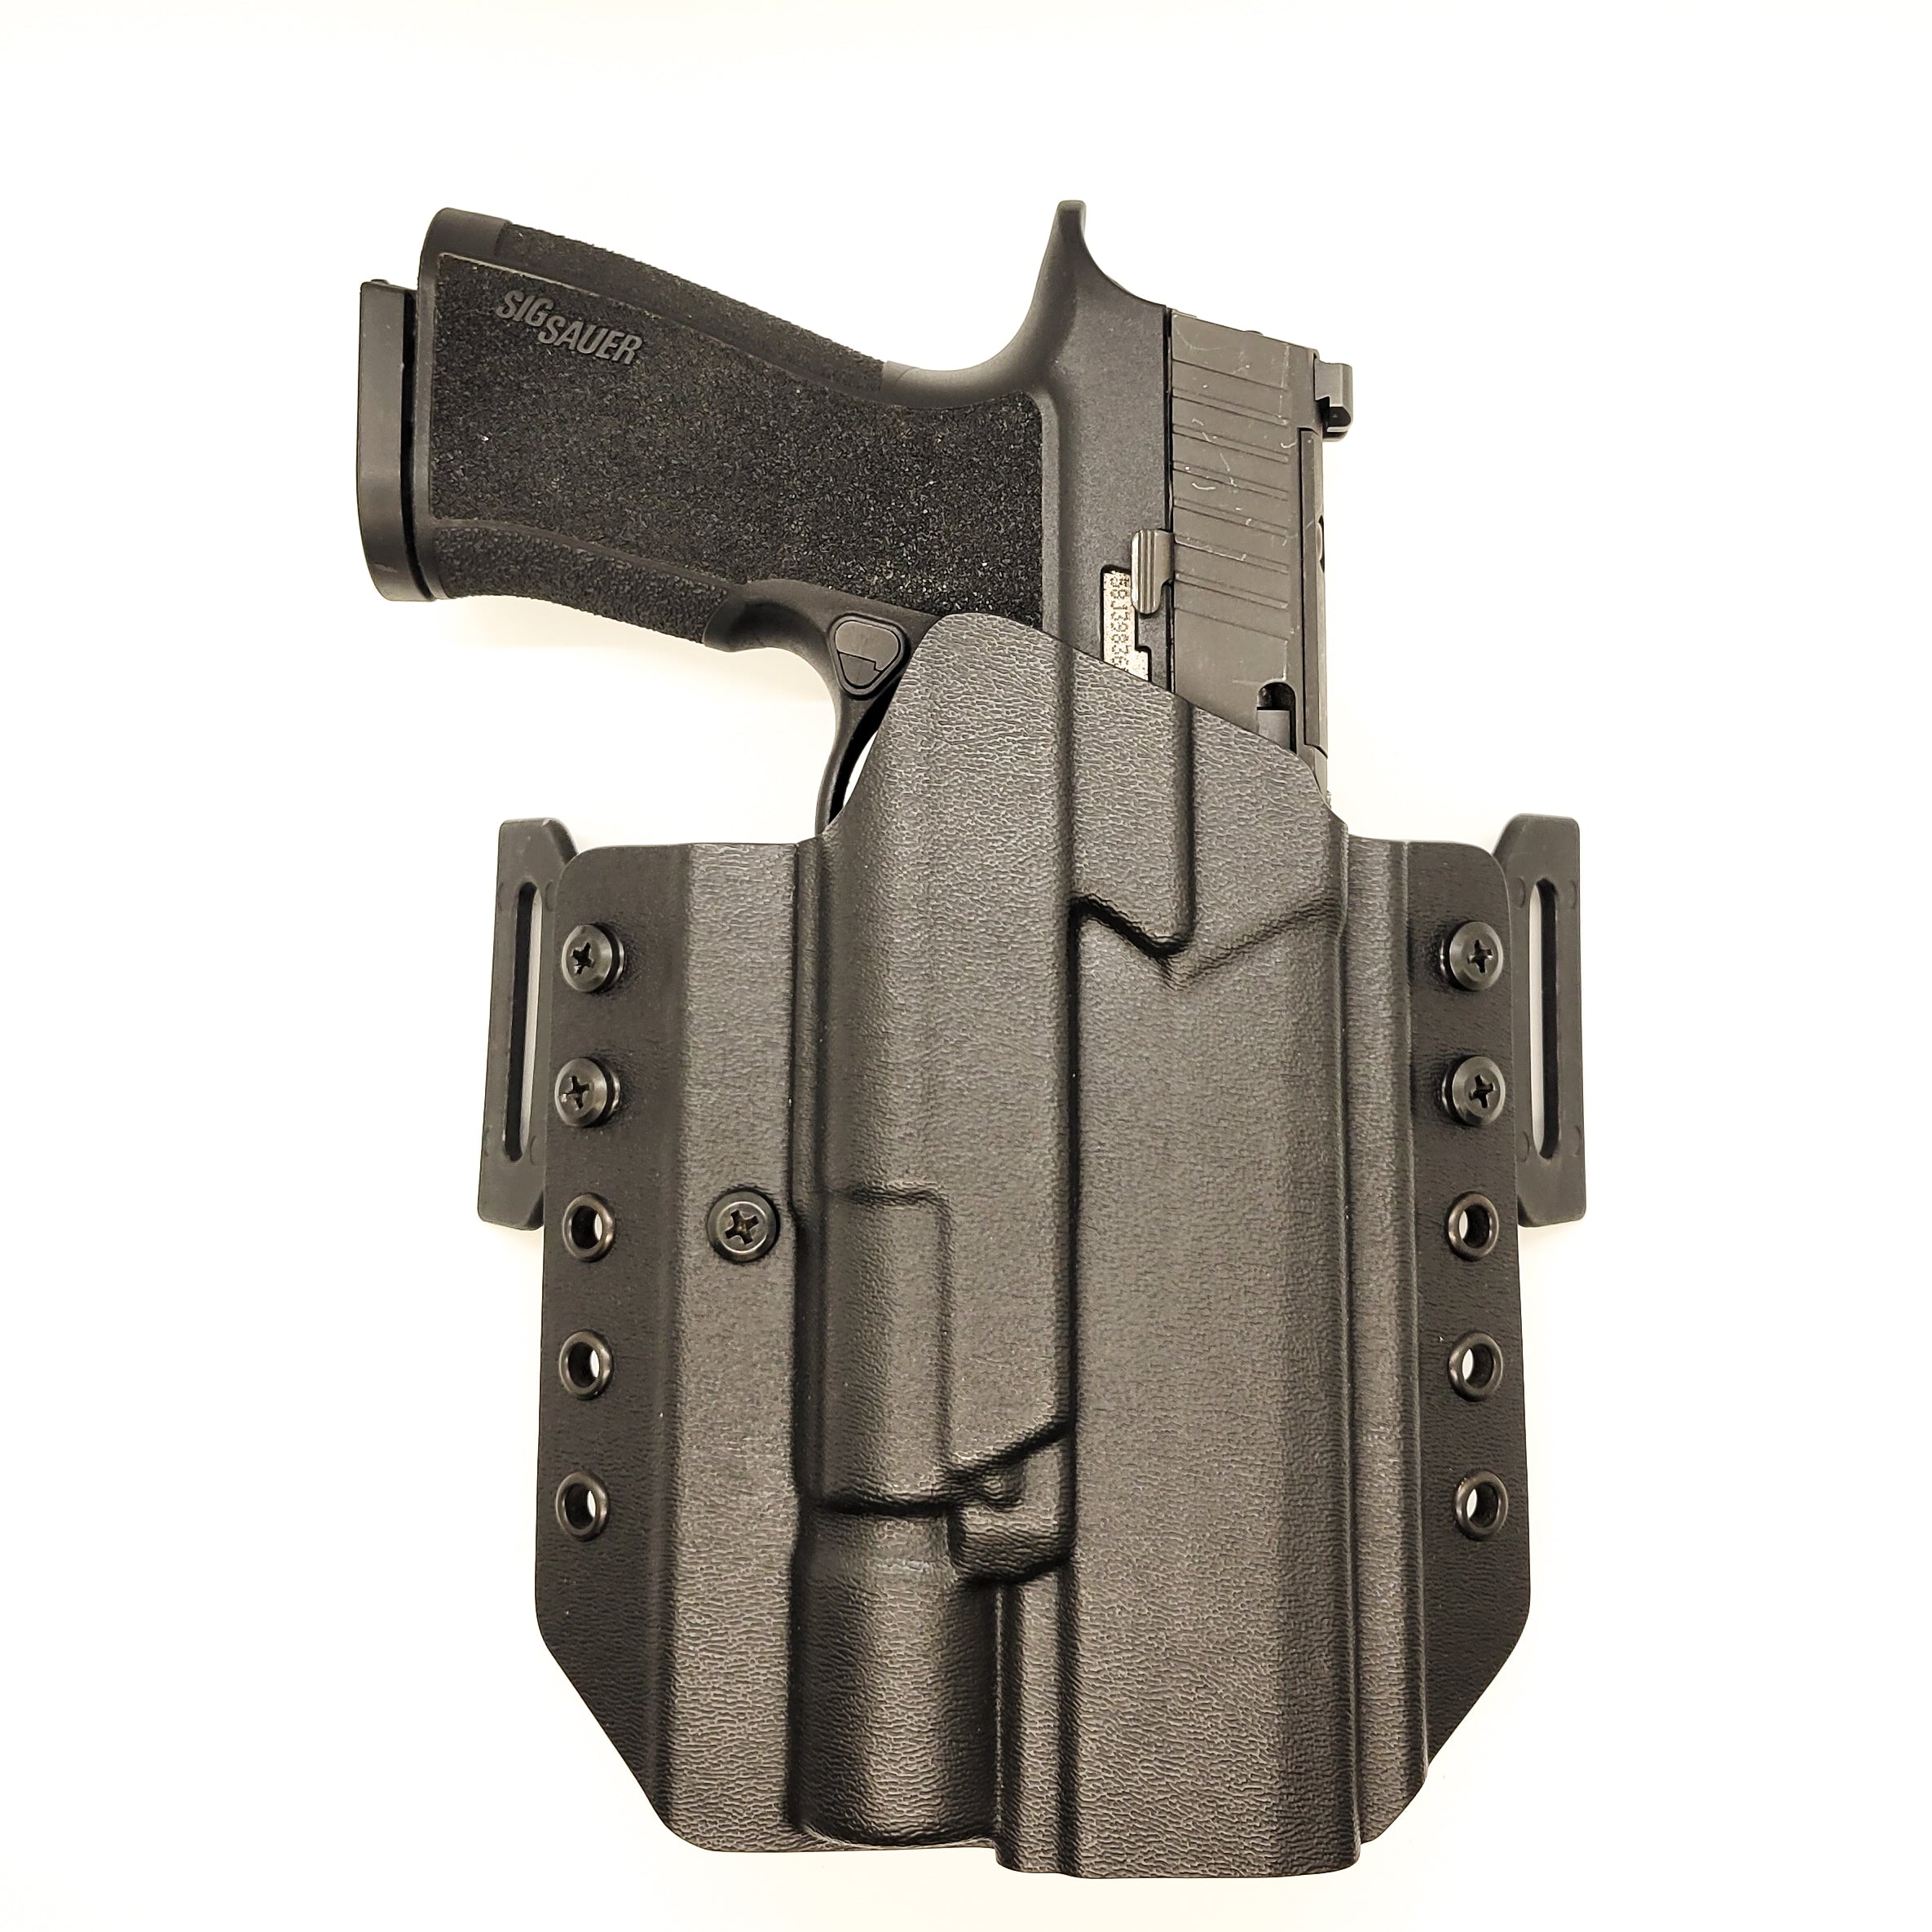 Outside Waistband Pancake Style Kydex holster designed to fit the Sig Sauer 10MM P320-XTEN and Surefire X-300U.  Full sweat guard, adjustable retention, open muzzle cleared for a red dot sight. Proudly made in the USA for veterans & law enforcement. 10 MM P320-XTEN, P320 X Ten, or P 320 XTEN. X300 X-300 U X-300A X-300B